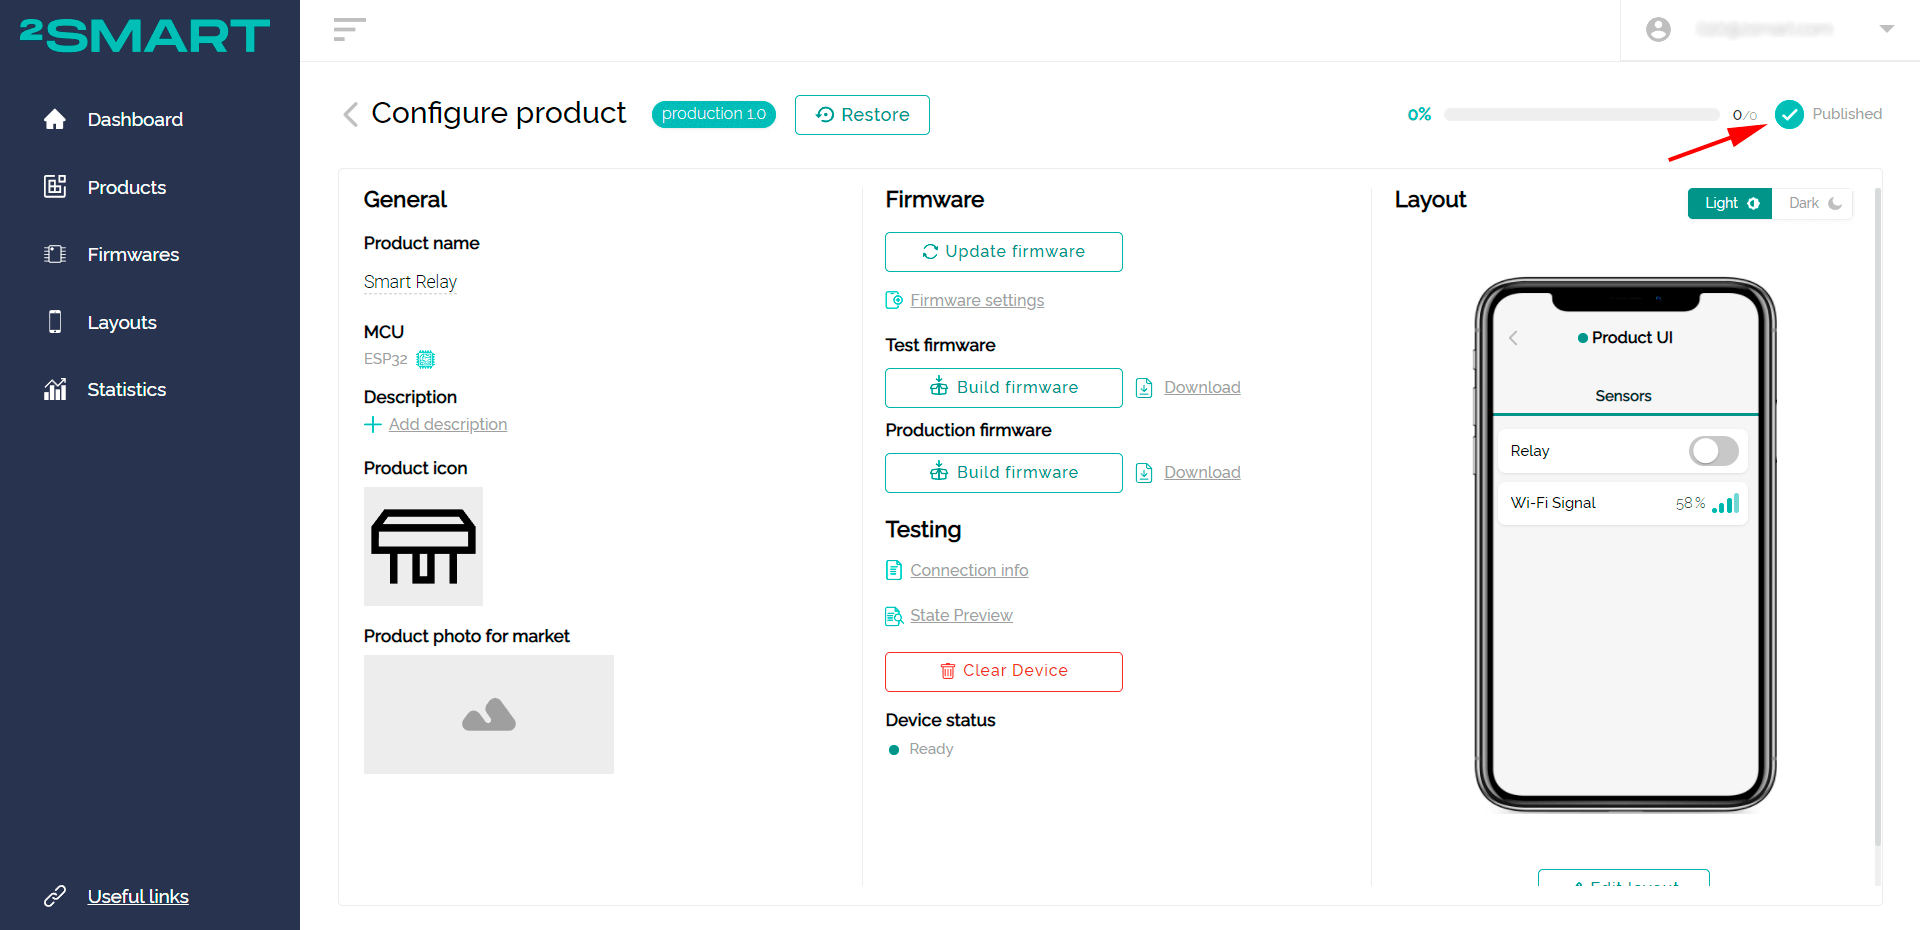 The product page in the vendor panel